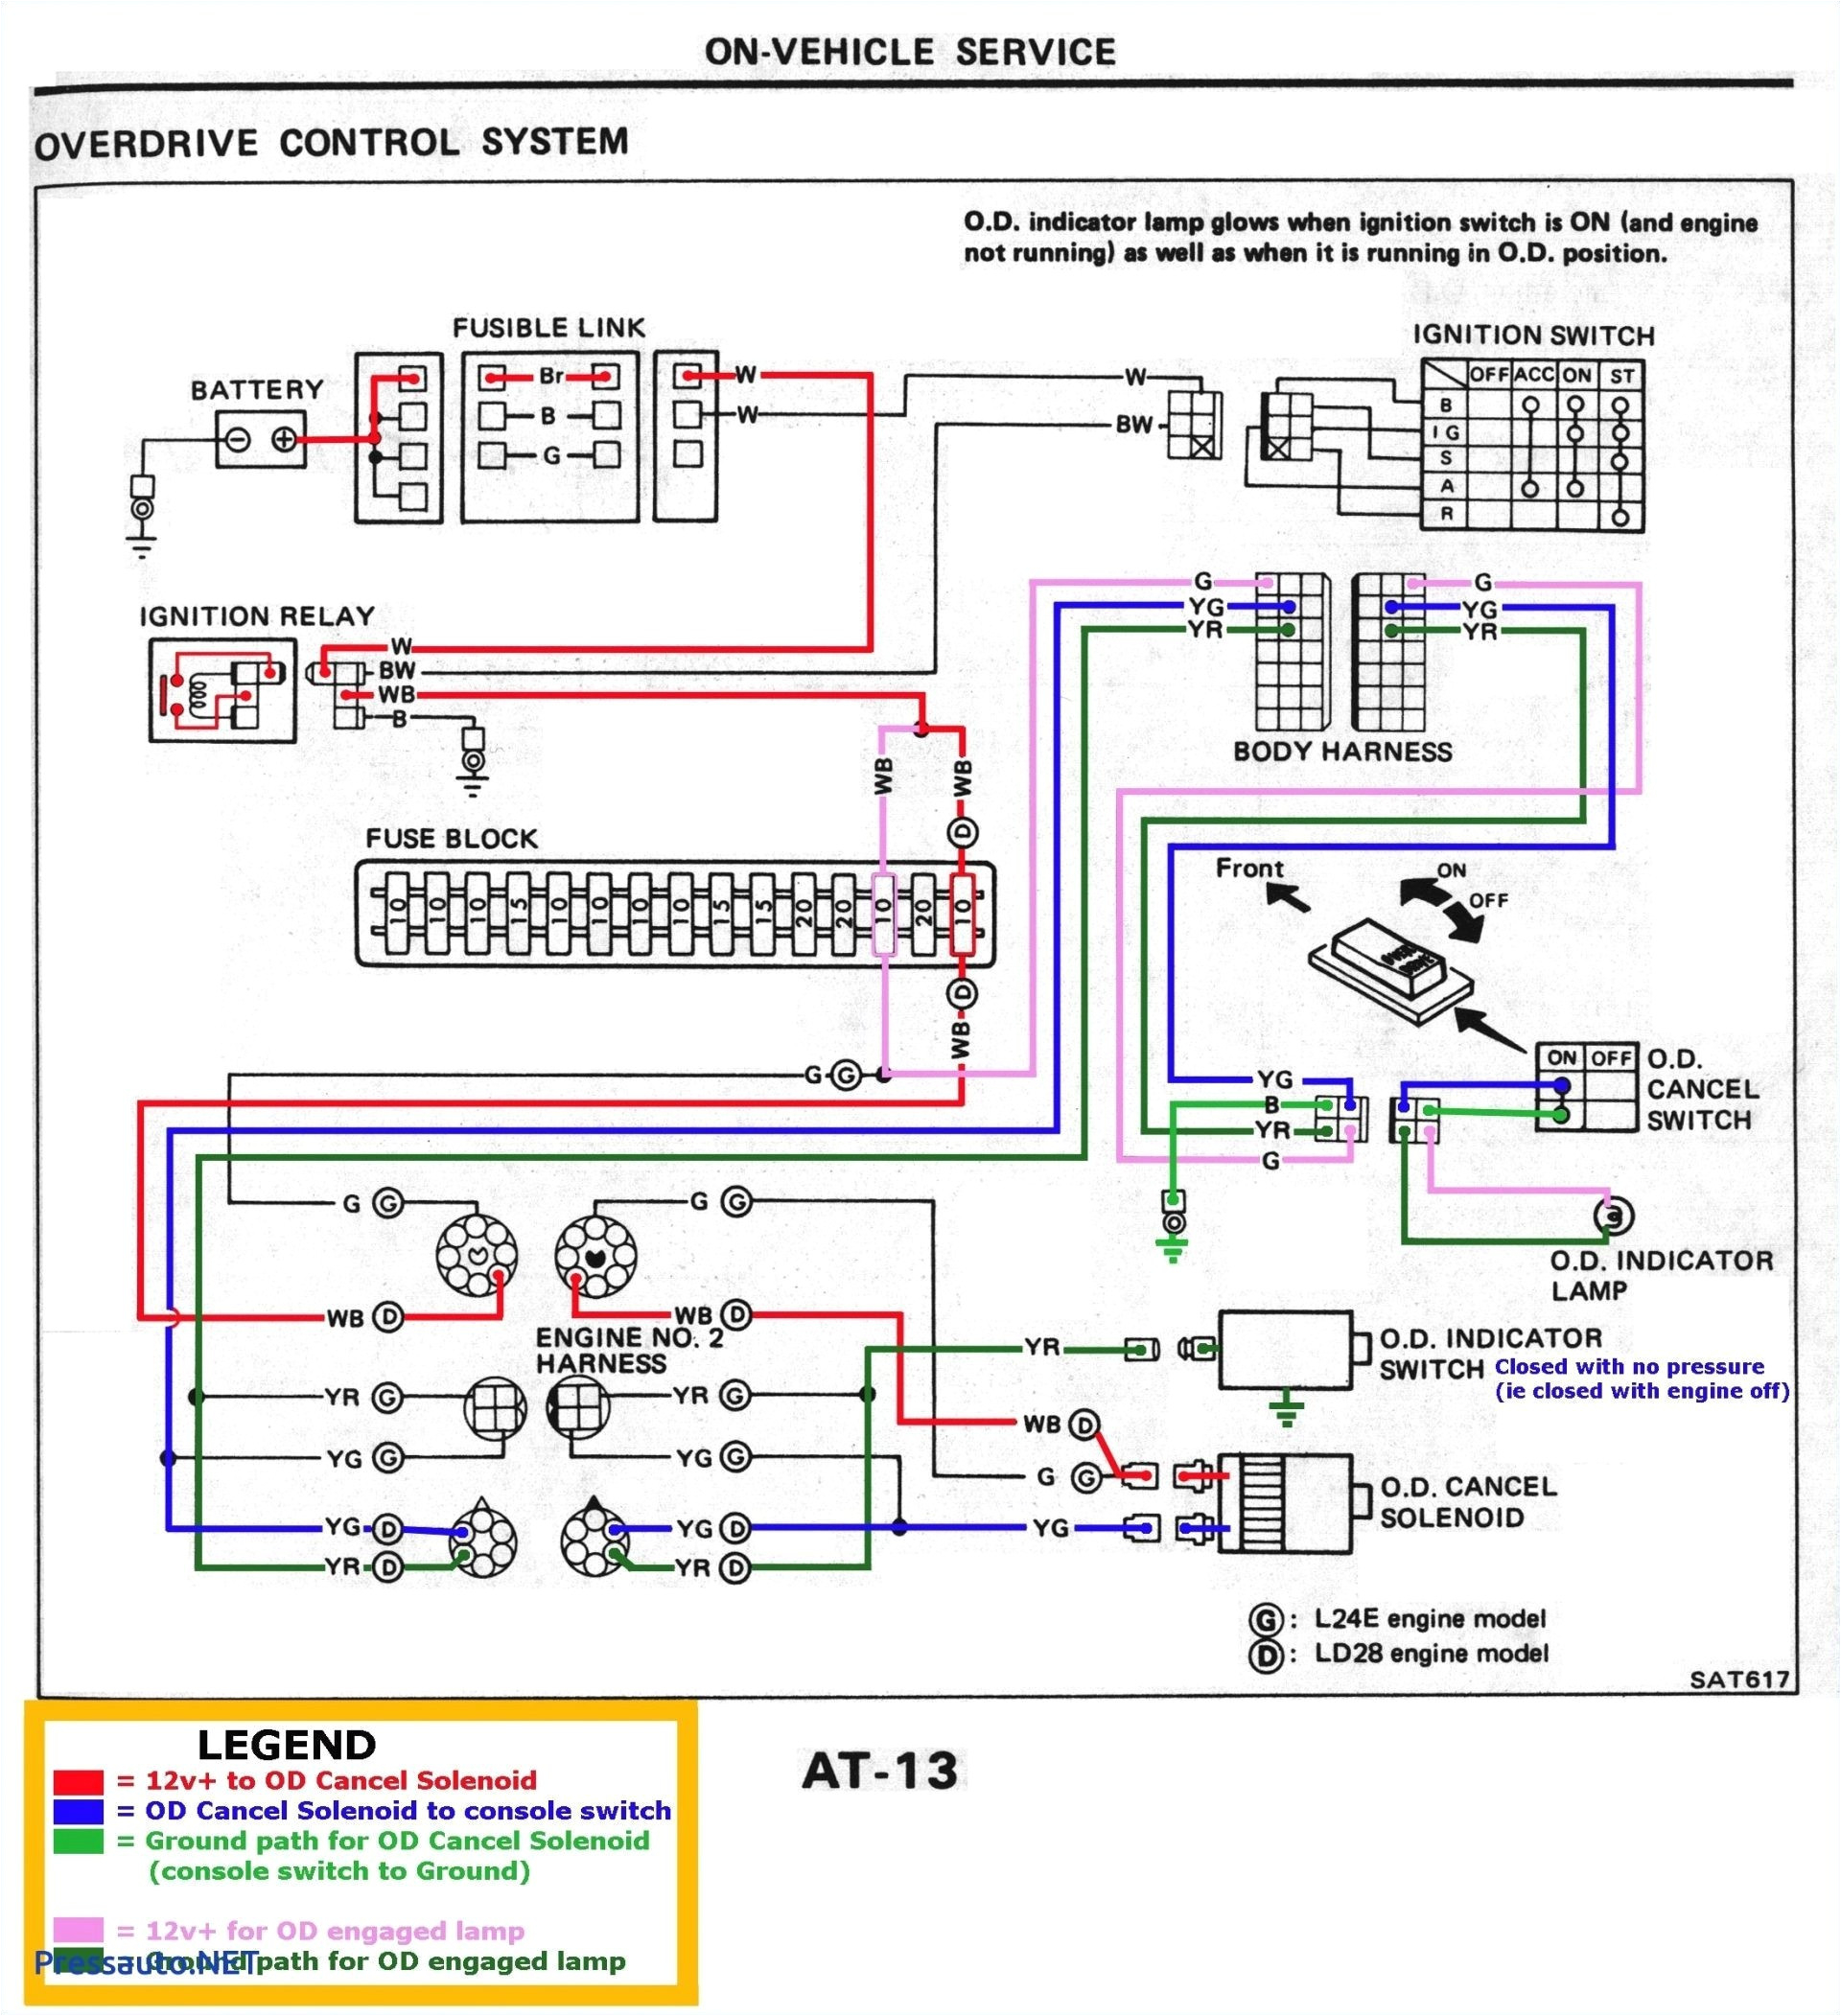 engine harness wiring scamatics humm wiring diagrams favorites g wiring harness clip manual e book engine